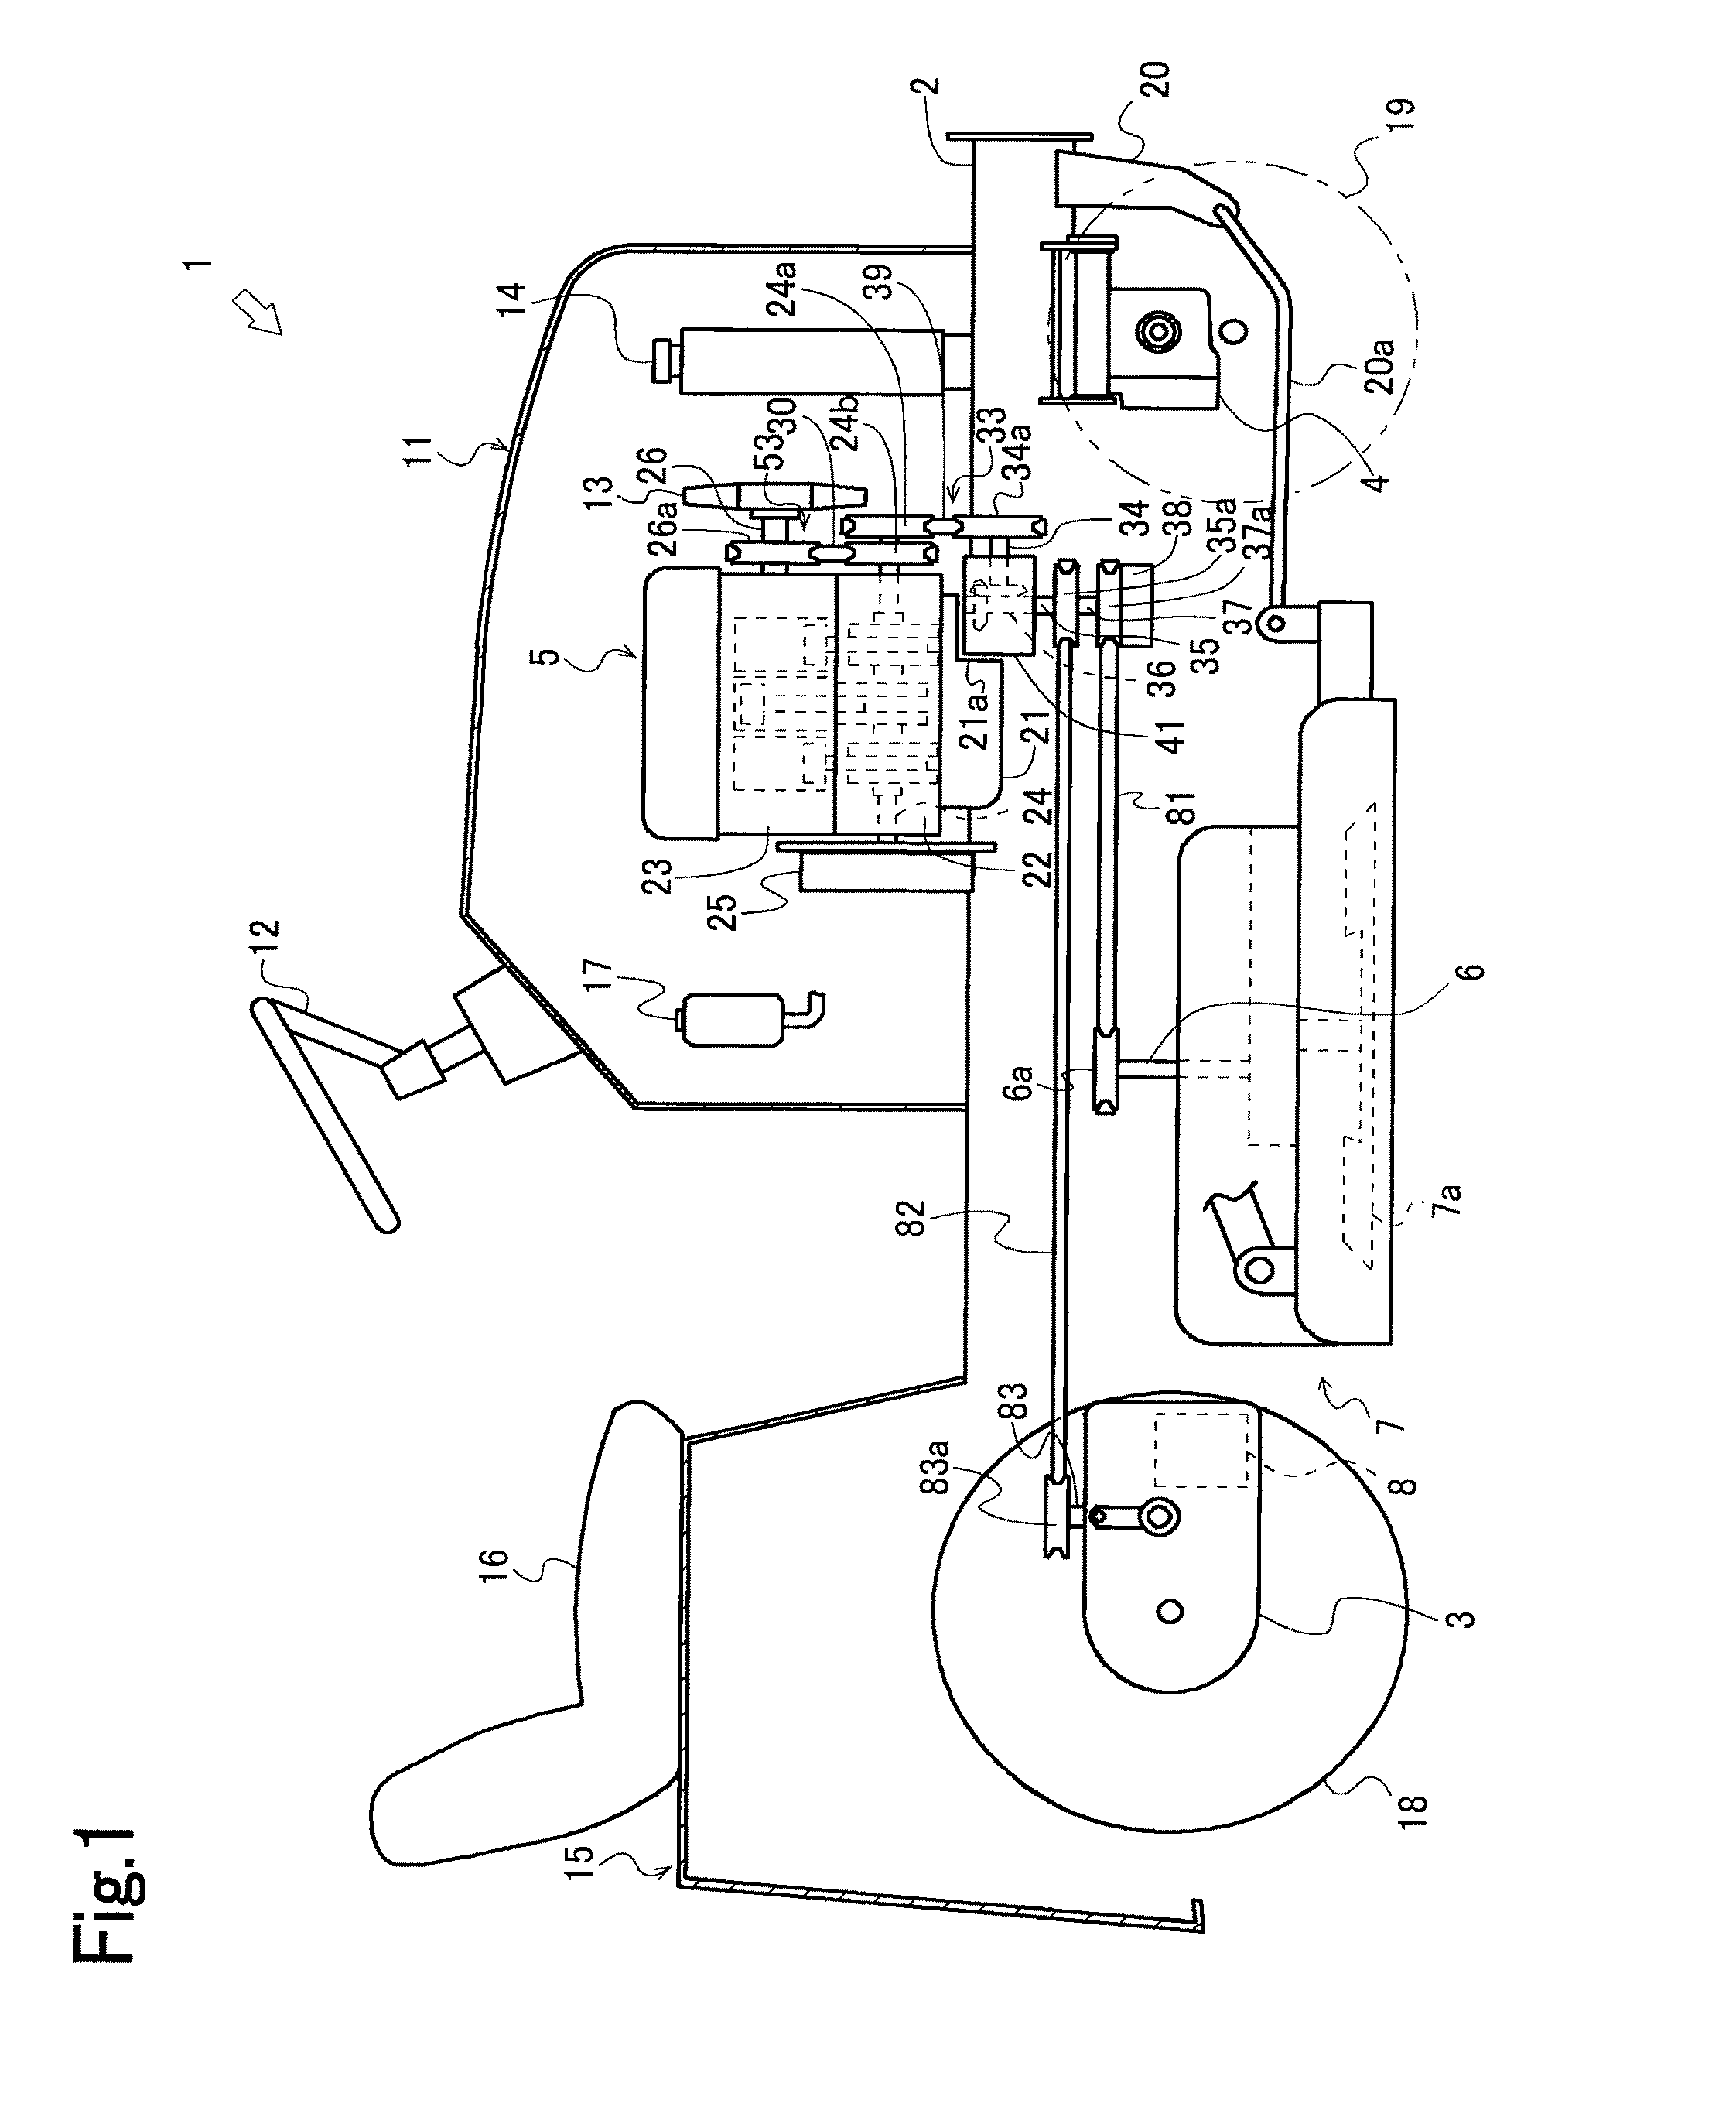 Engine and power transmission device